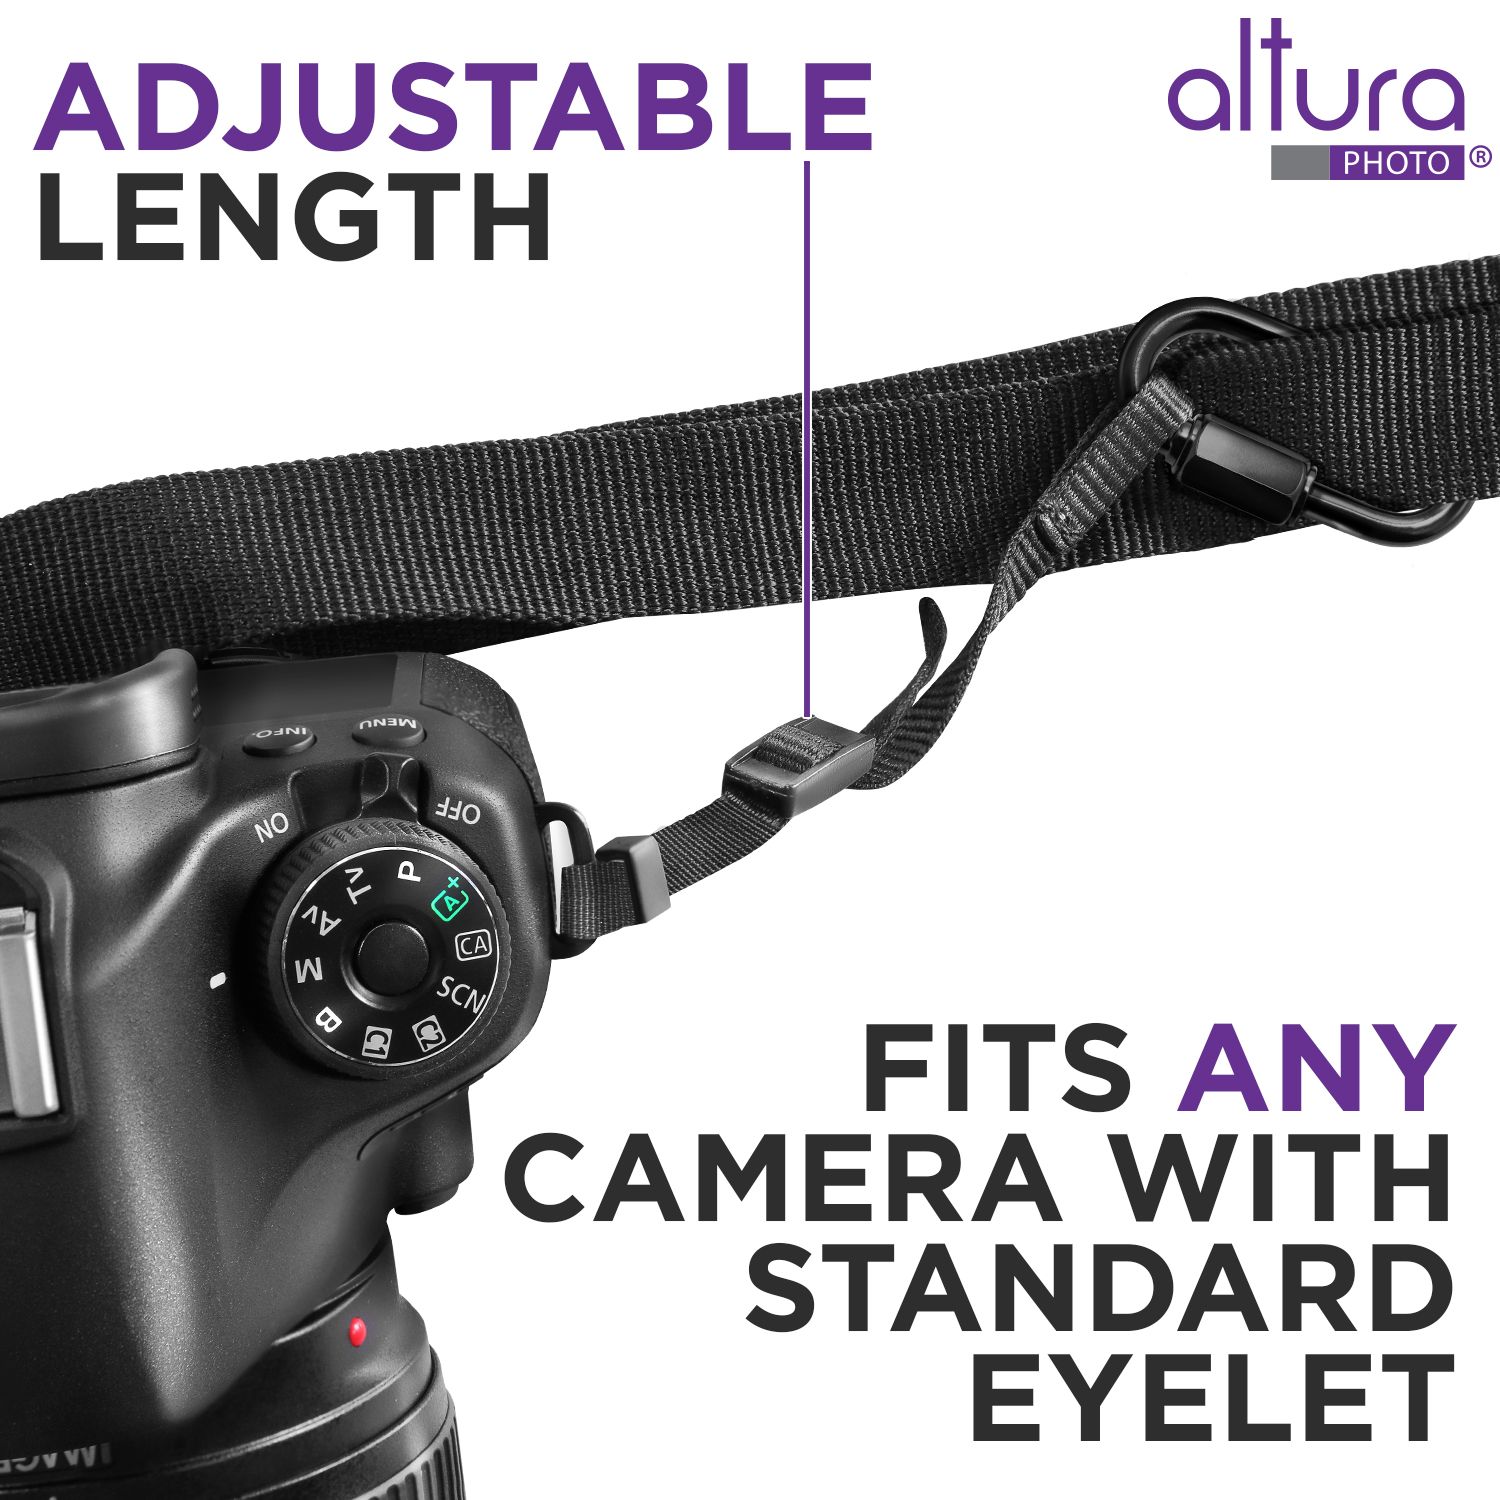 Altura Photo Camera Neck Strap w. Quick Release & Safety Tether For  Photographers - Adjustable DSLR Camera Strap for Sony, Nikon & Canon - Safe  